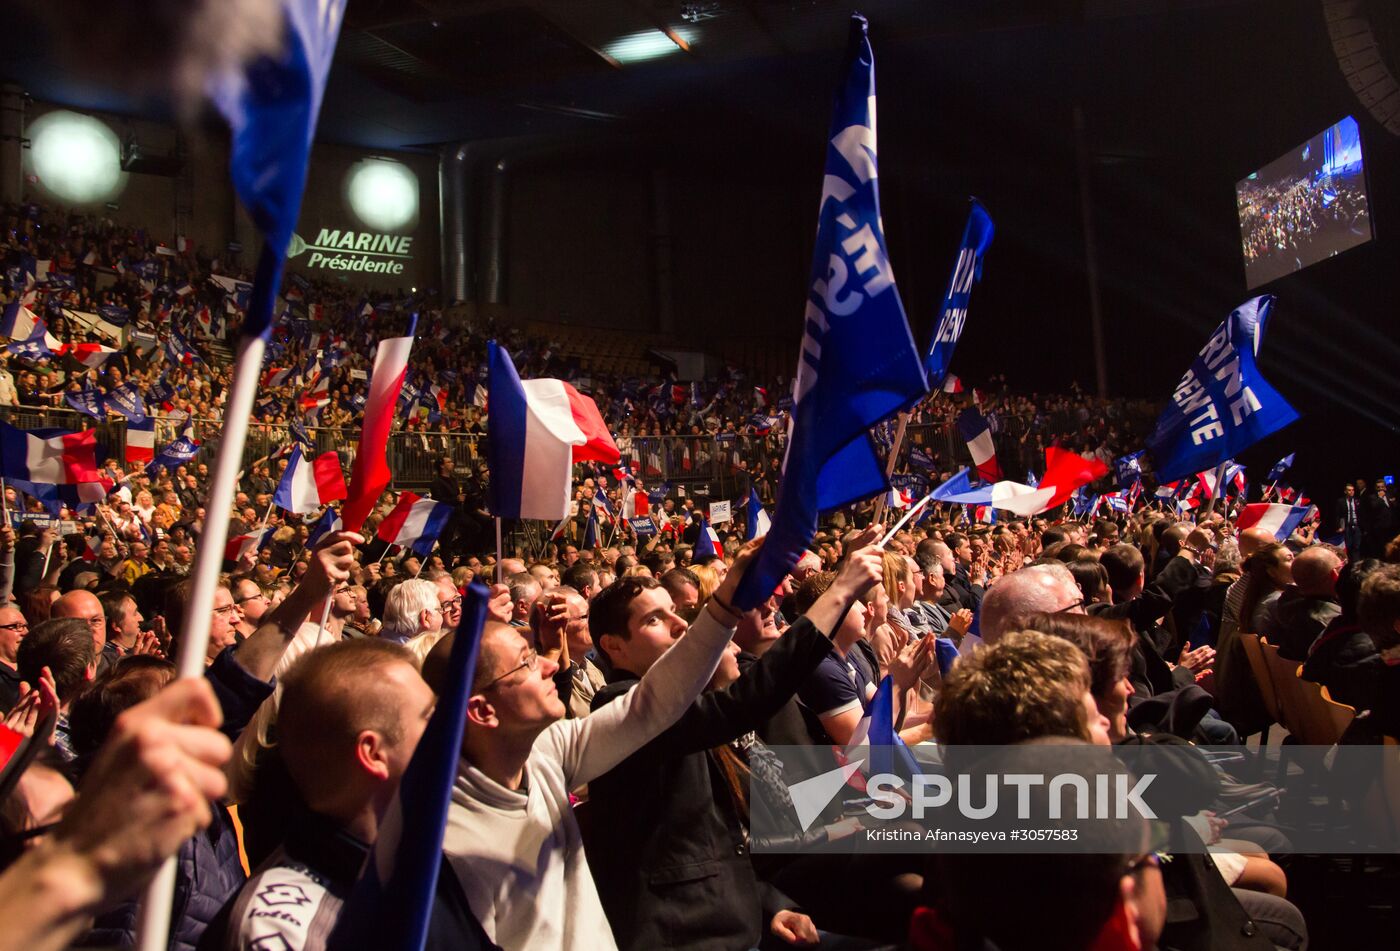 Rally in support of French presidential candidate Marine Le Pen in Lille